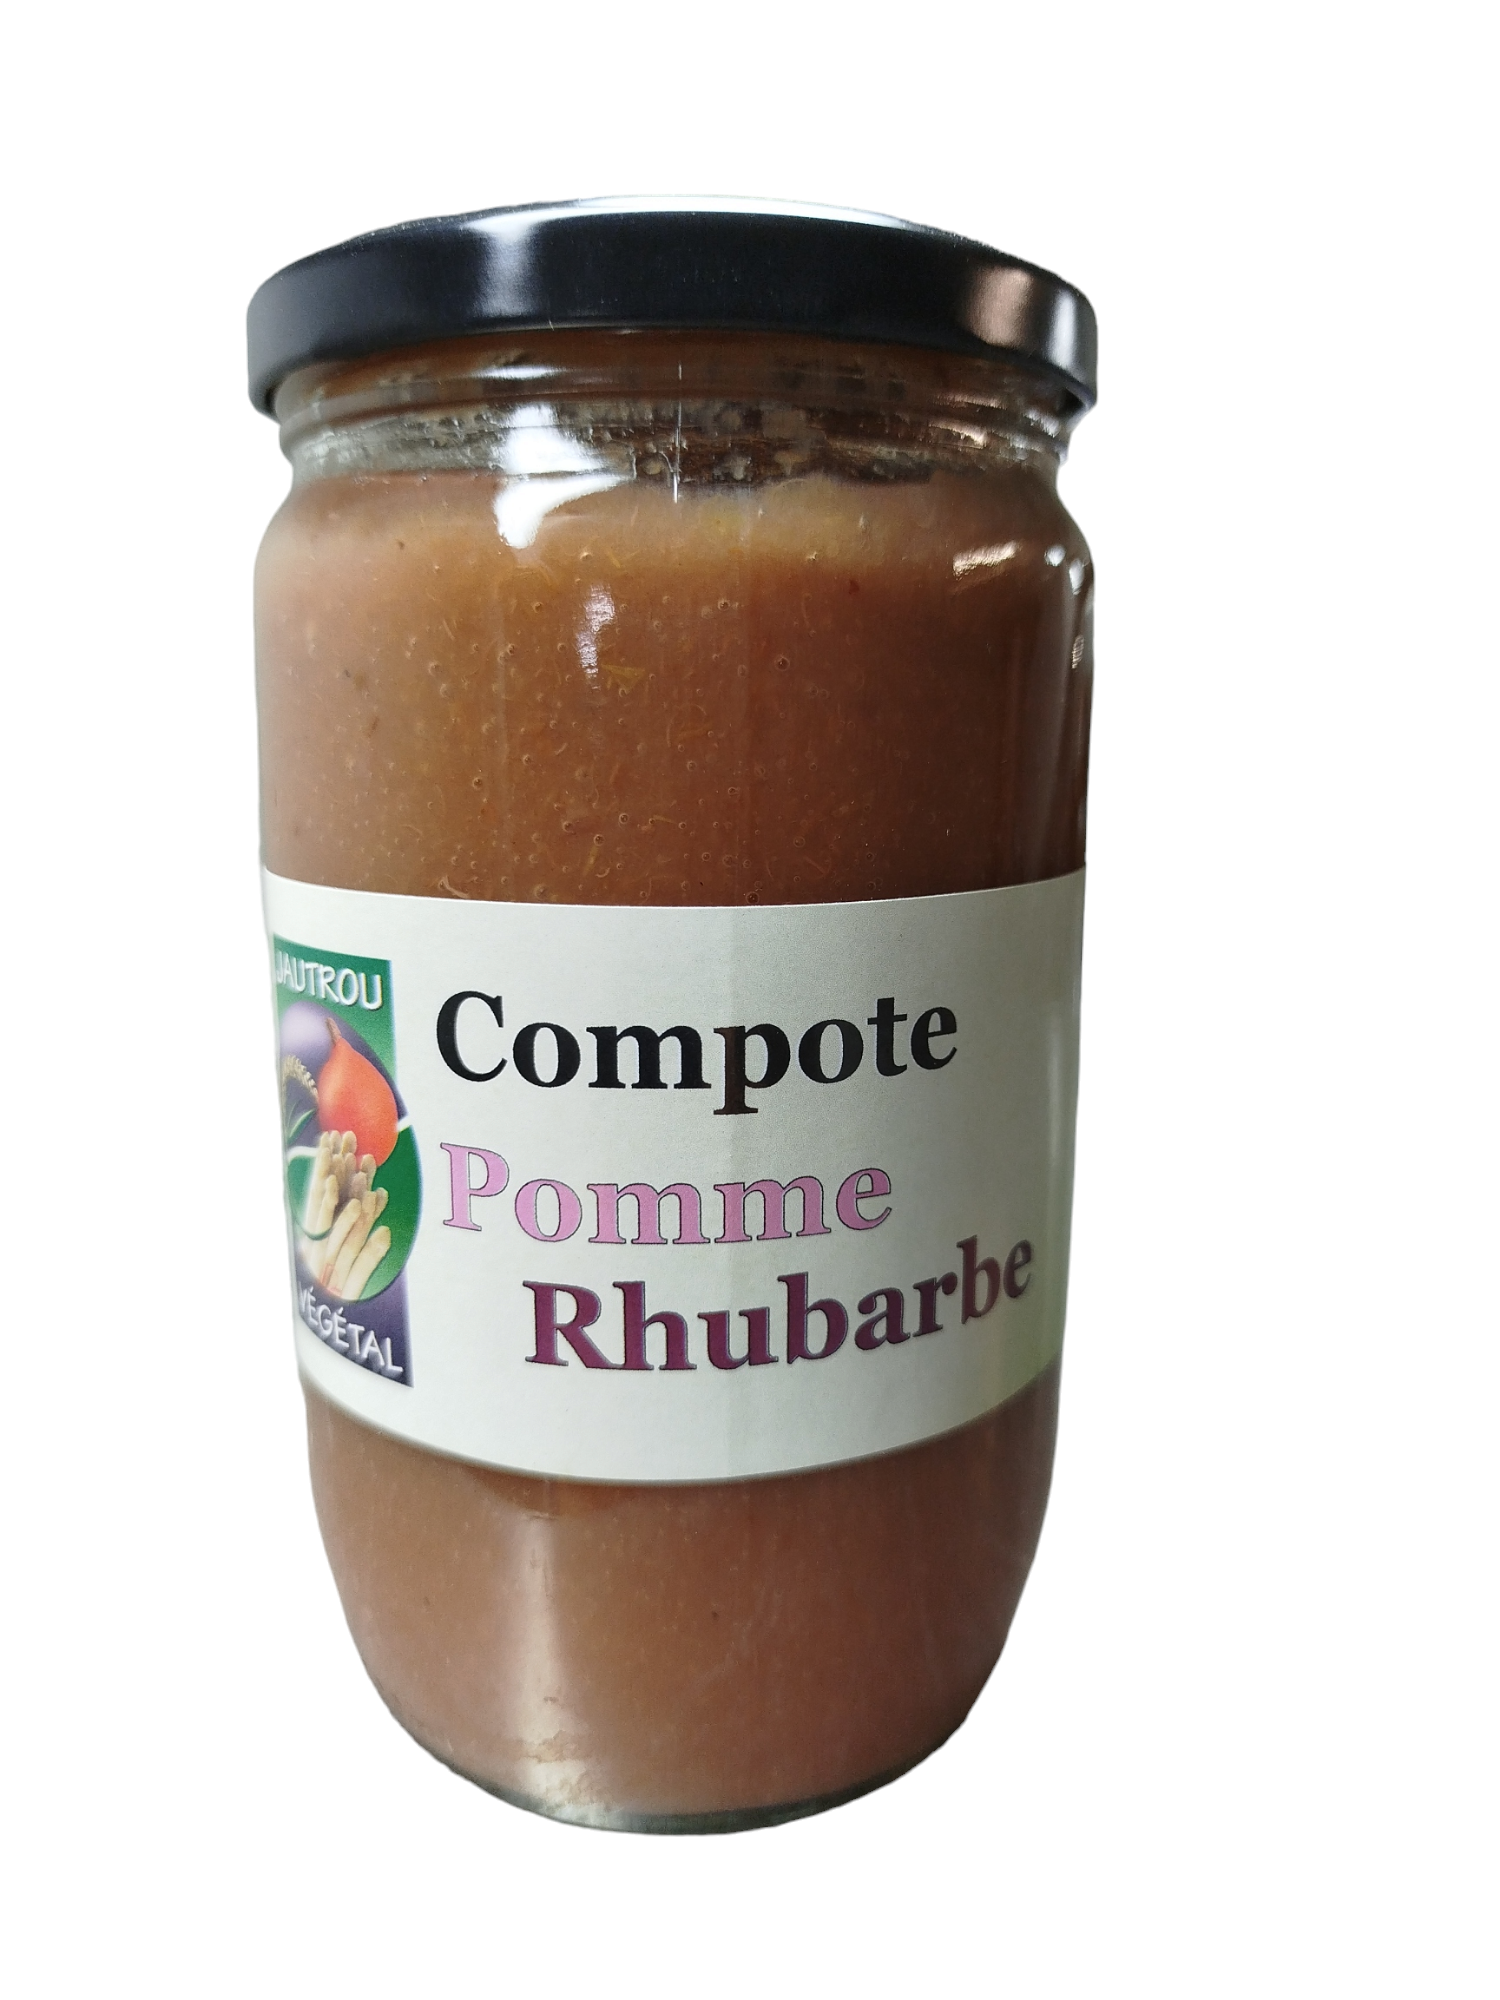 Compote Pomme Rhubarbe